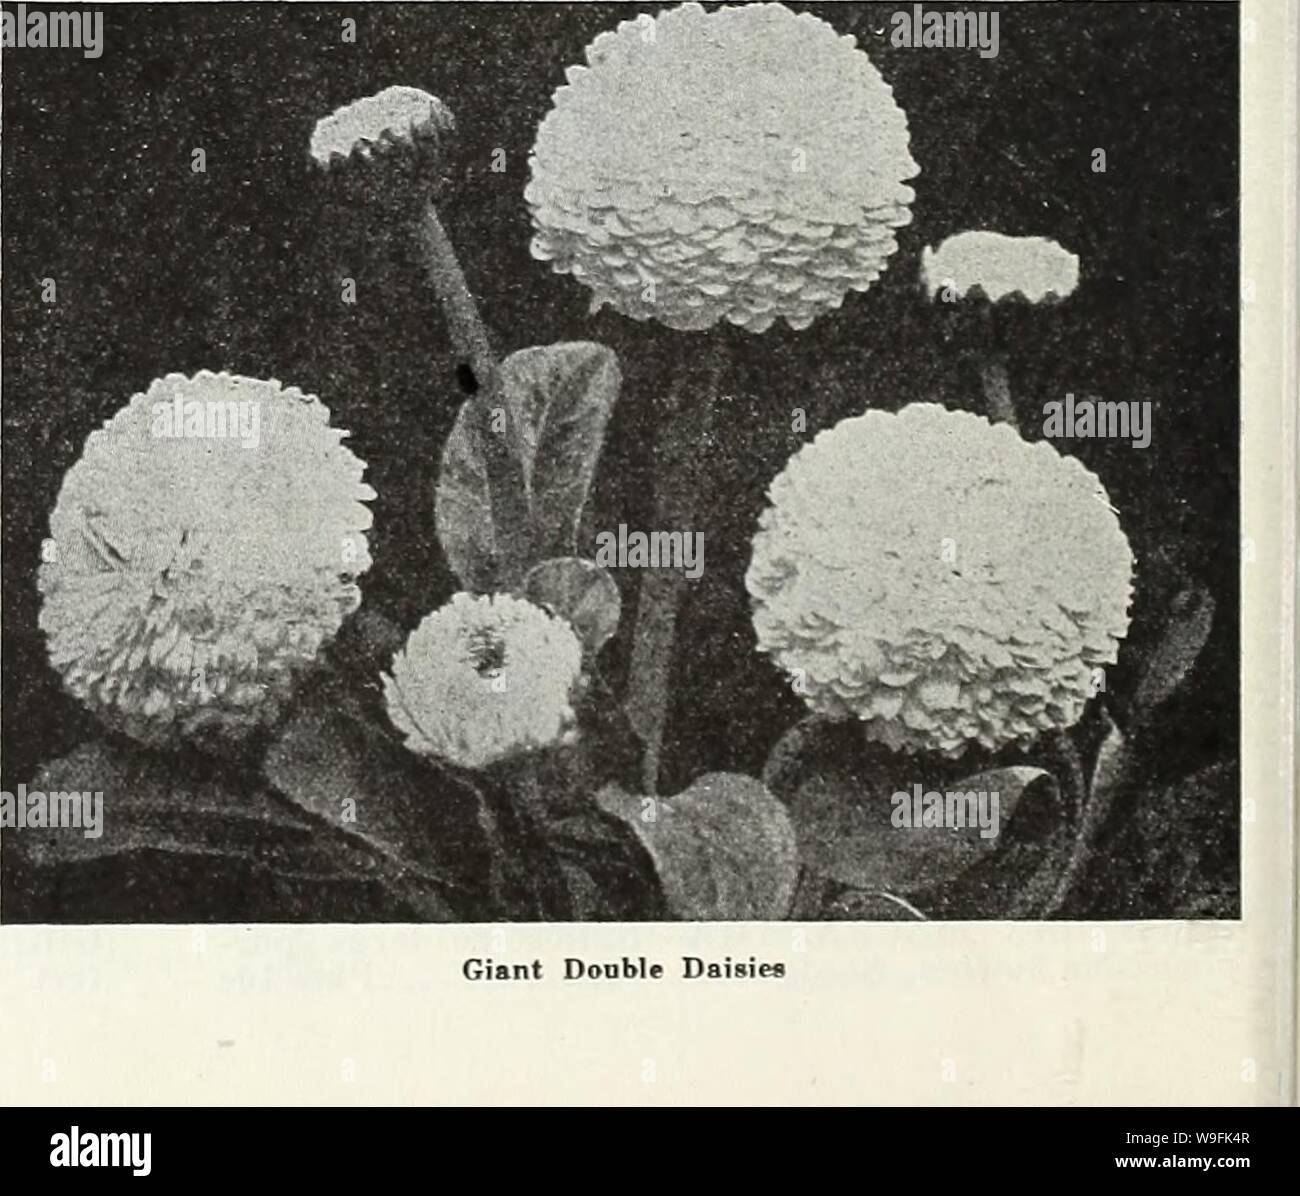 Archive image from page 49 of Currie's garden annual  62nd. Currie's garden annual : 62nd year spring 1937  curriesgardenann19curr 3 Year: 1937 ( Coreopsis—'Mayfield Giant' HARDY PERENNIAL CANDYTUFT GIBRALTRICA — White, shading to lilac. Seeds    „    Pkt. JOc SEMPERVIRENS — White. Plants, price, each. 25c. Seeds - — Pkt. 10c CATANANCHE Charming, hardy perennial, attaining about 3 feet in height. Excellent for cutting or as a border plant. BICOLOR—Blue and white flowers. Seeds Pkt. 15c COERULEA—Blue flowers. Seeds Pkt. 15e CRUCIANELLA (Crosstvort) STYLOSA-—Hardy perennial, suitable for rock wo Stock Photo